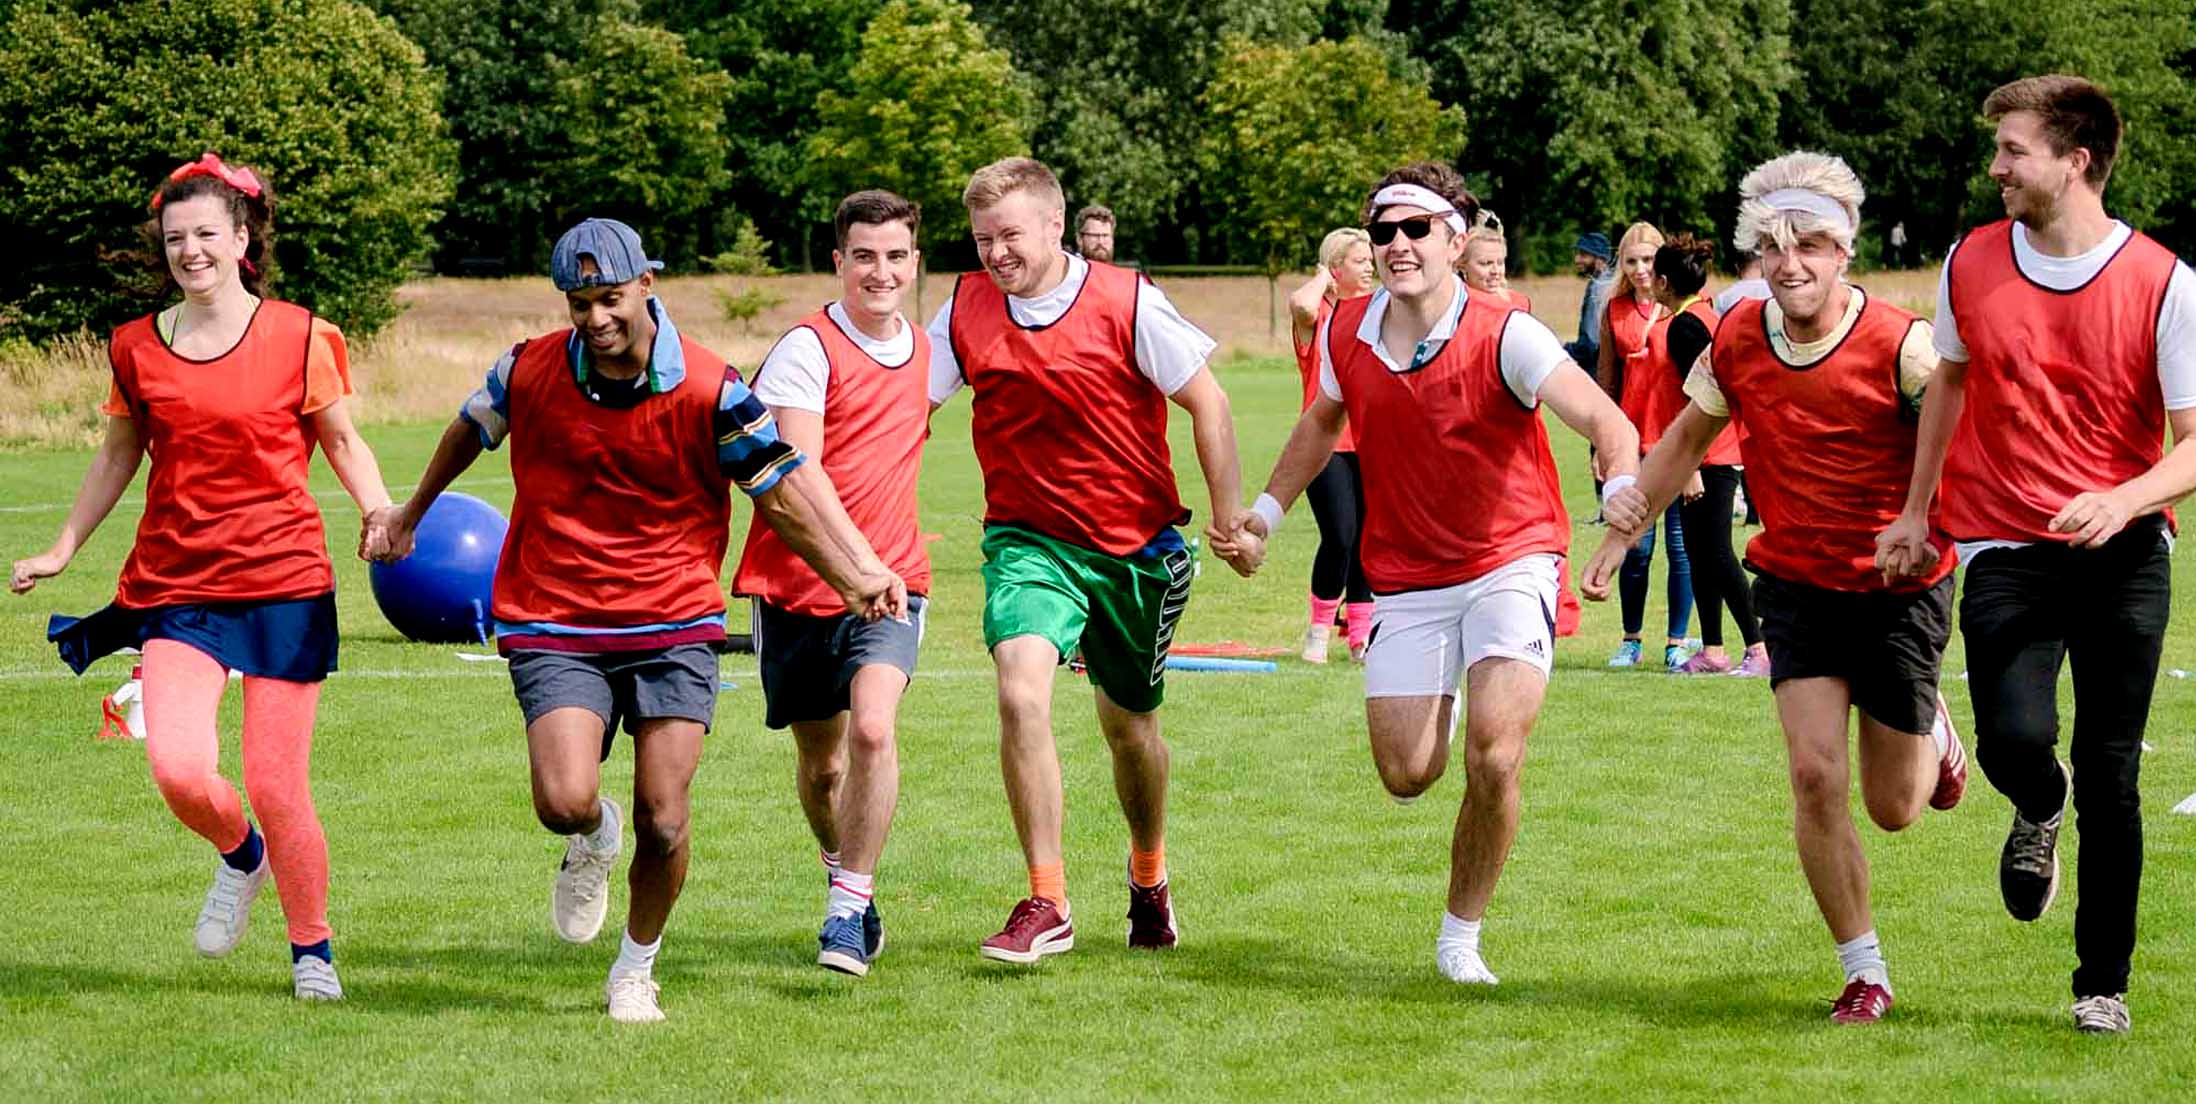 Top 10 Team Building Activities in London - Corporate Sports Day